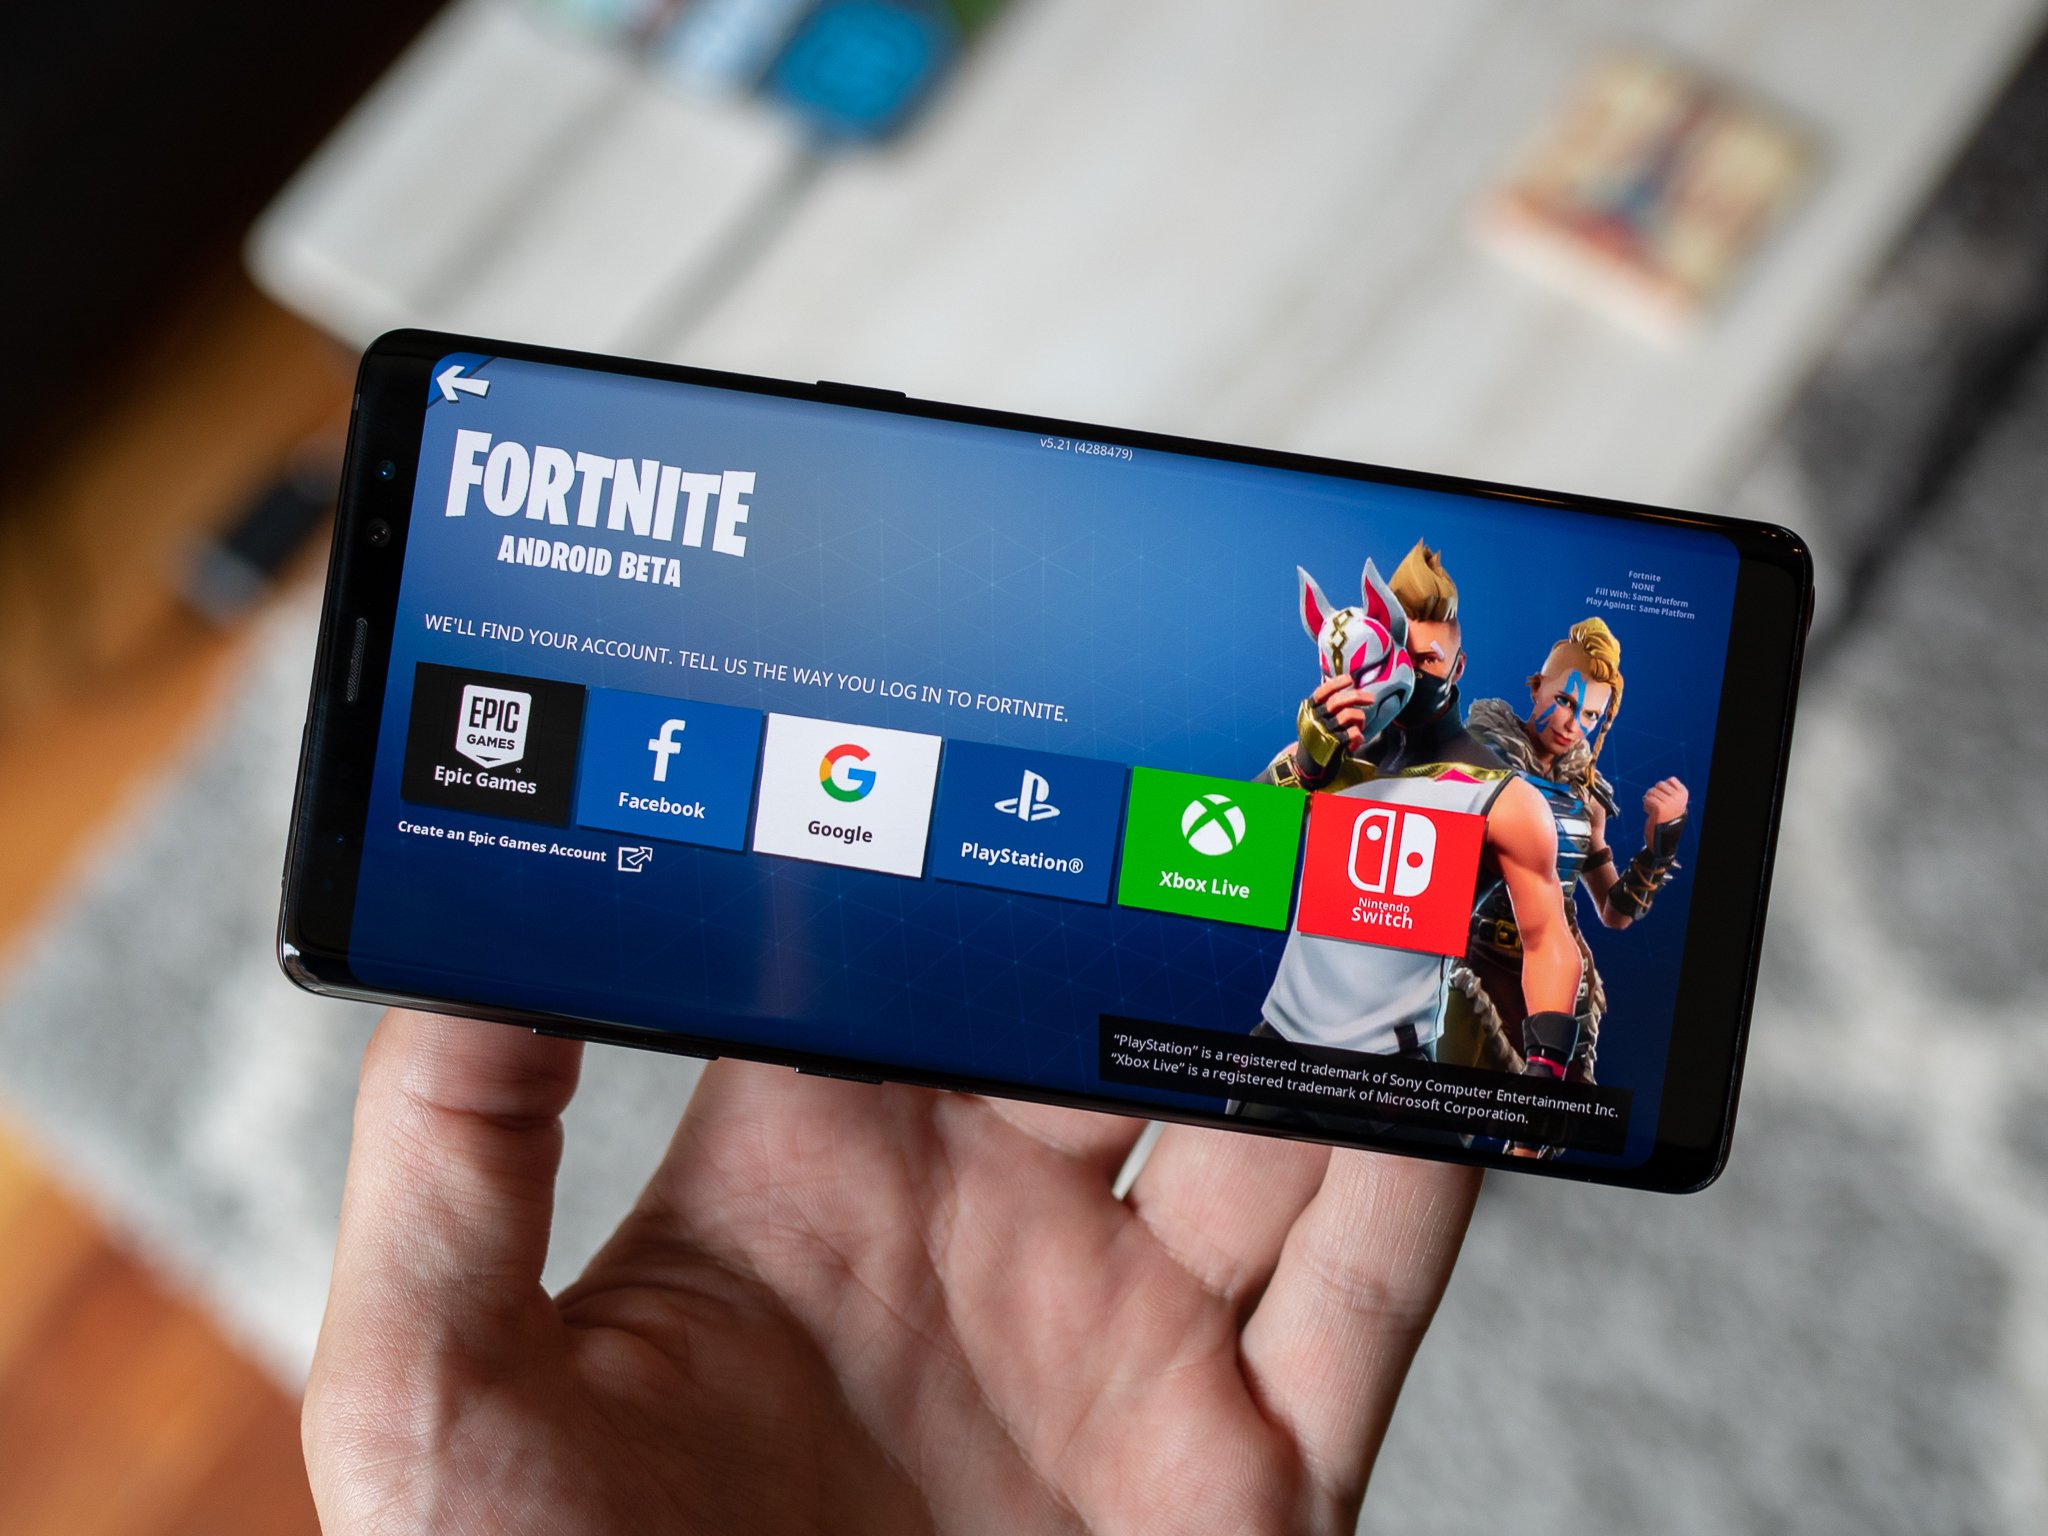 top 7 things you need to know about fortnite for android - how to make fortnite update faster pc 2019